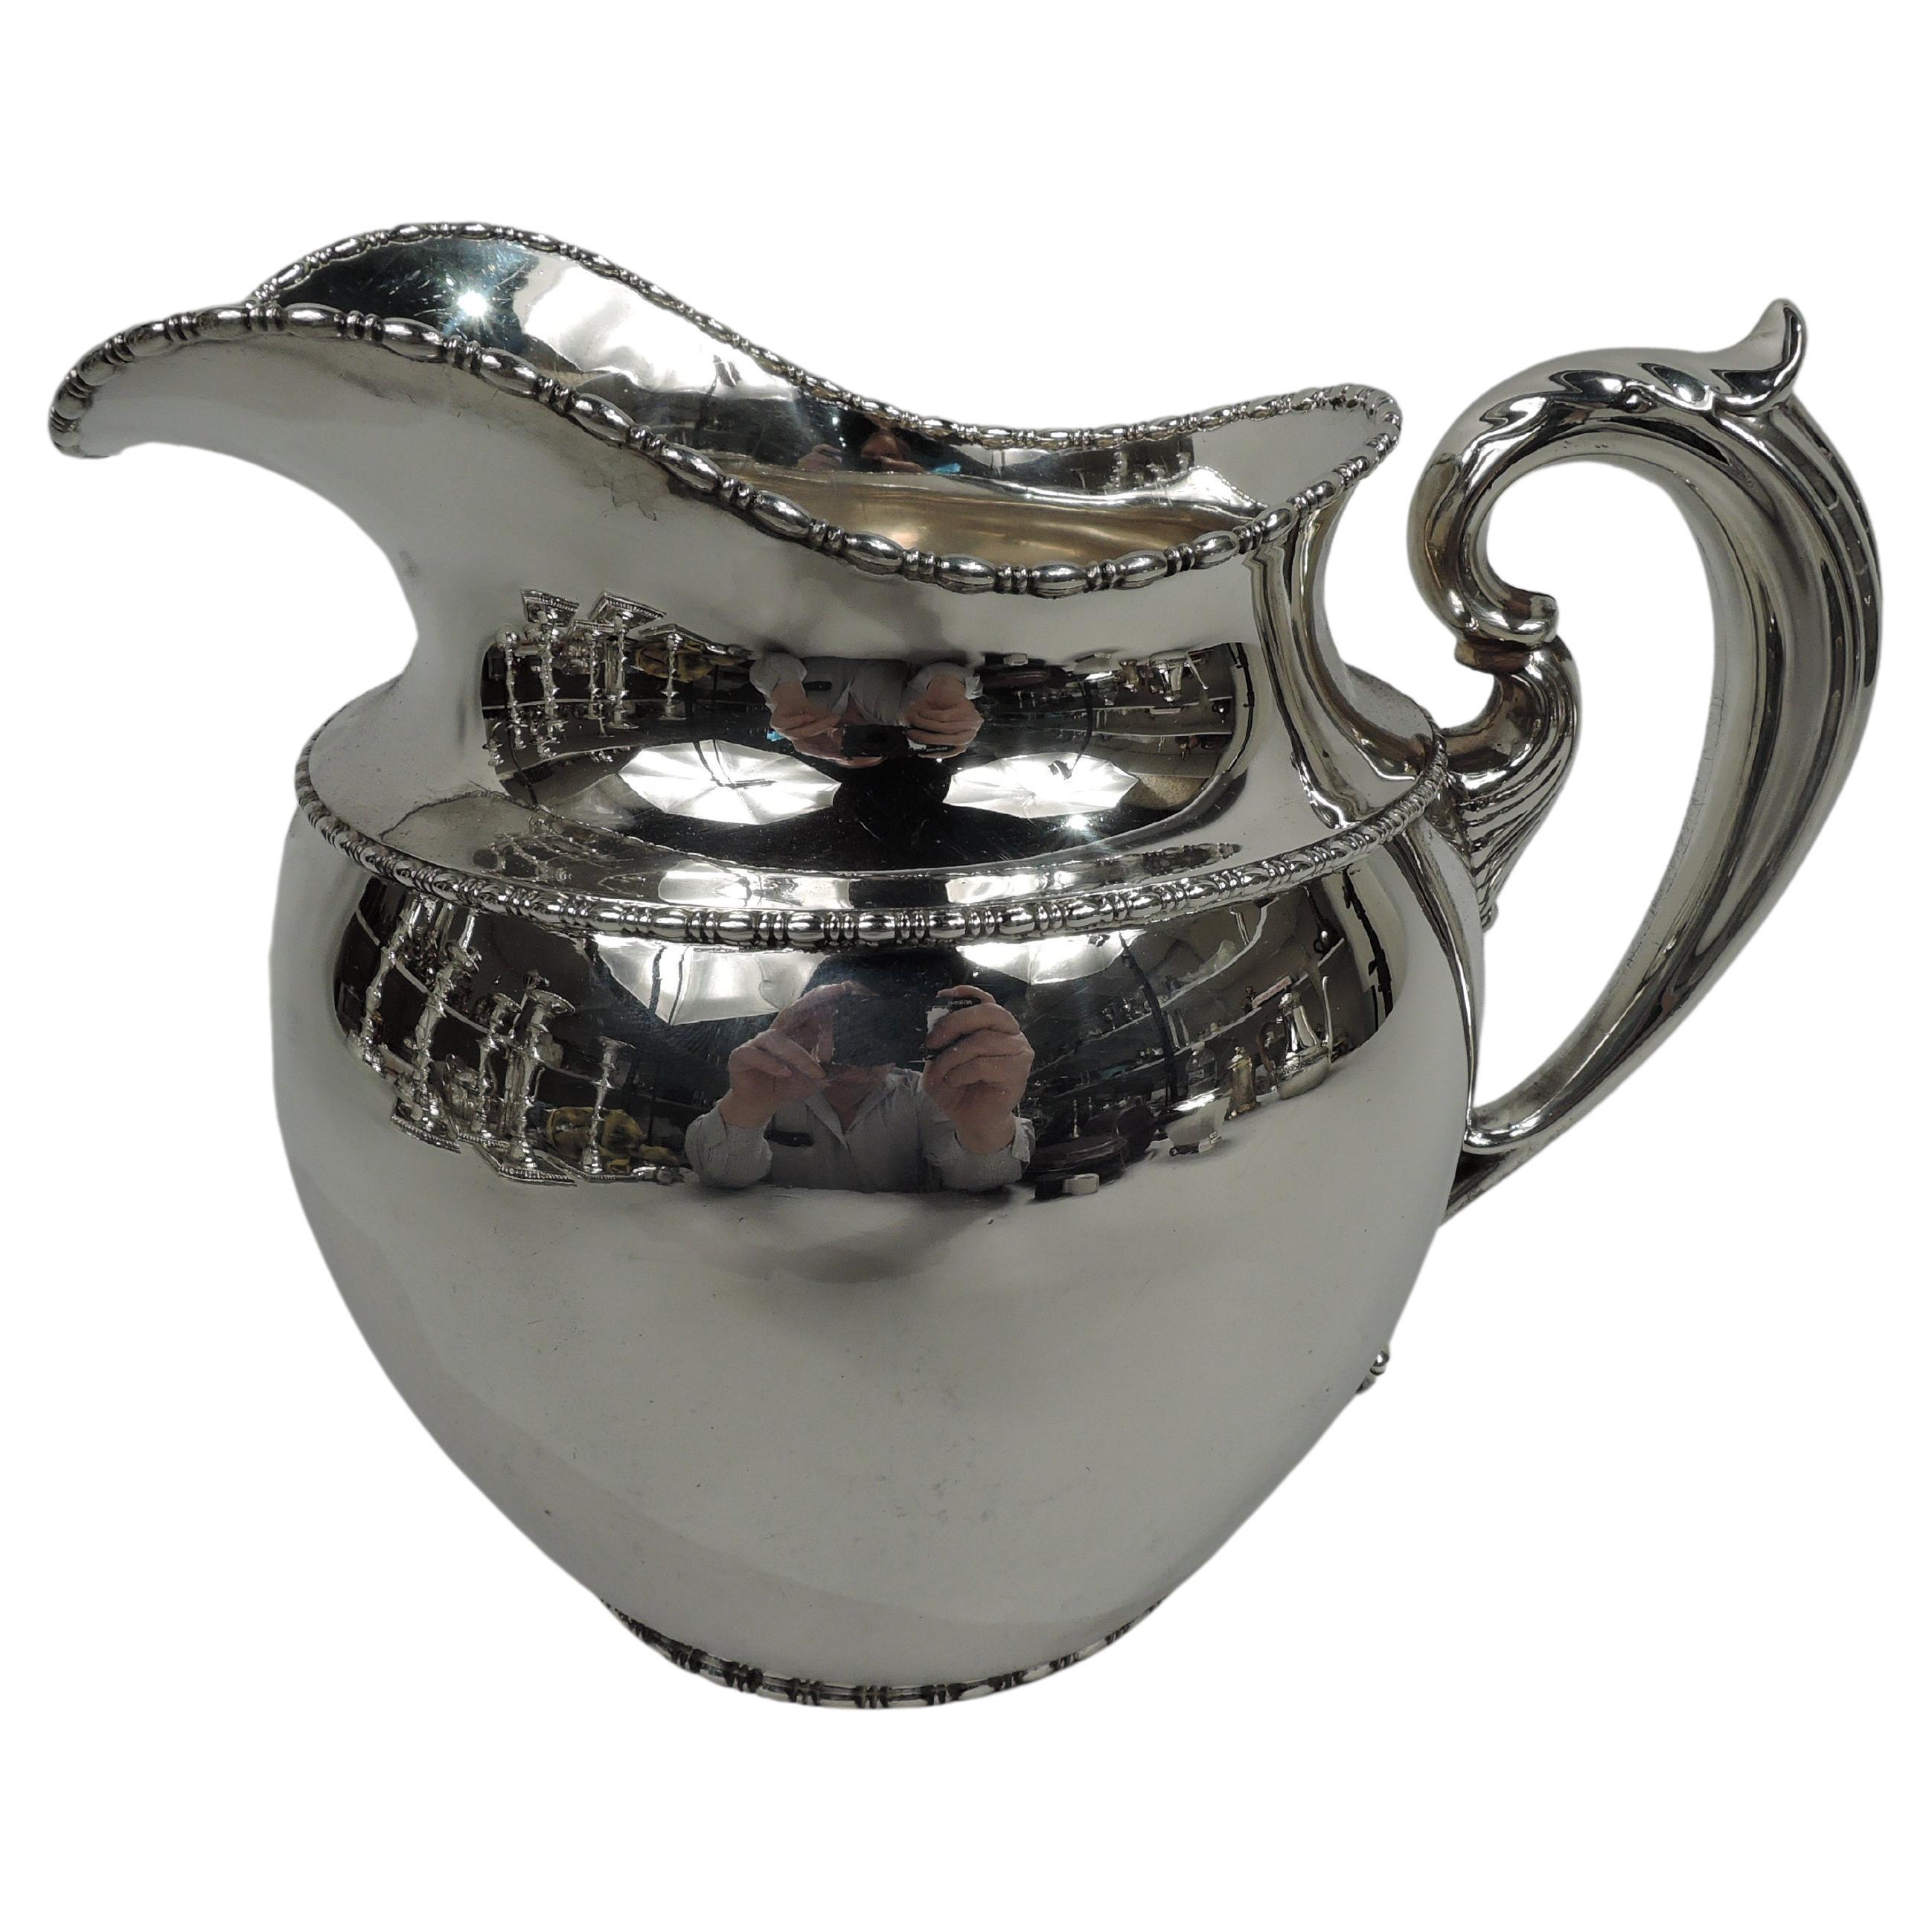 Antique Boston Edwardian Classical Sterling Silver Water Pitcher